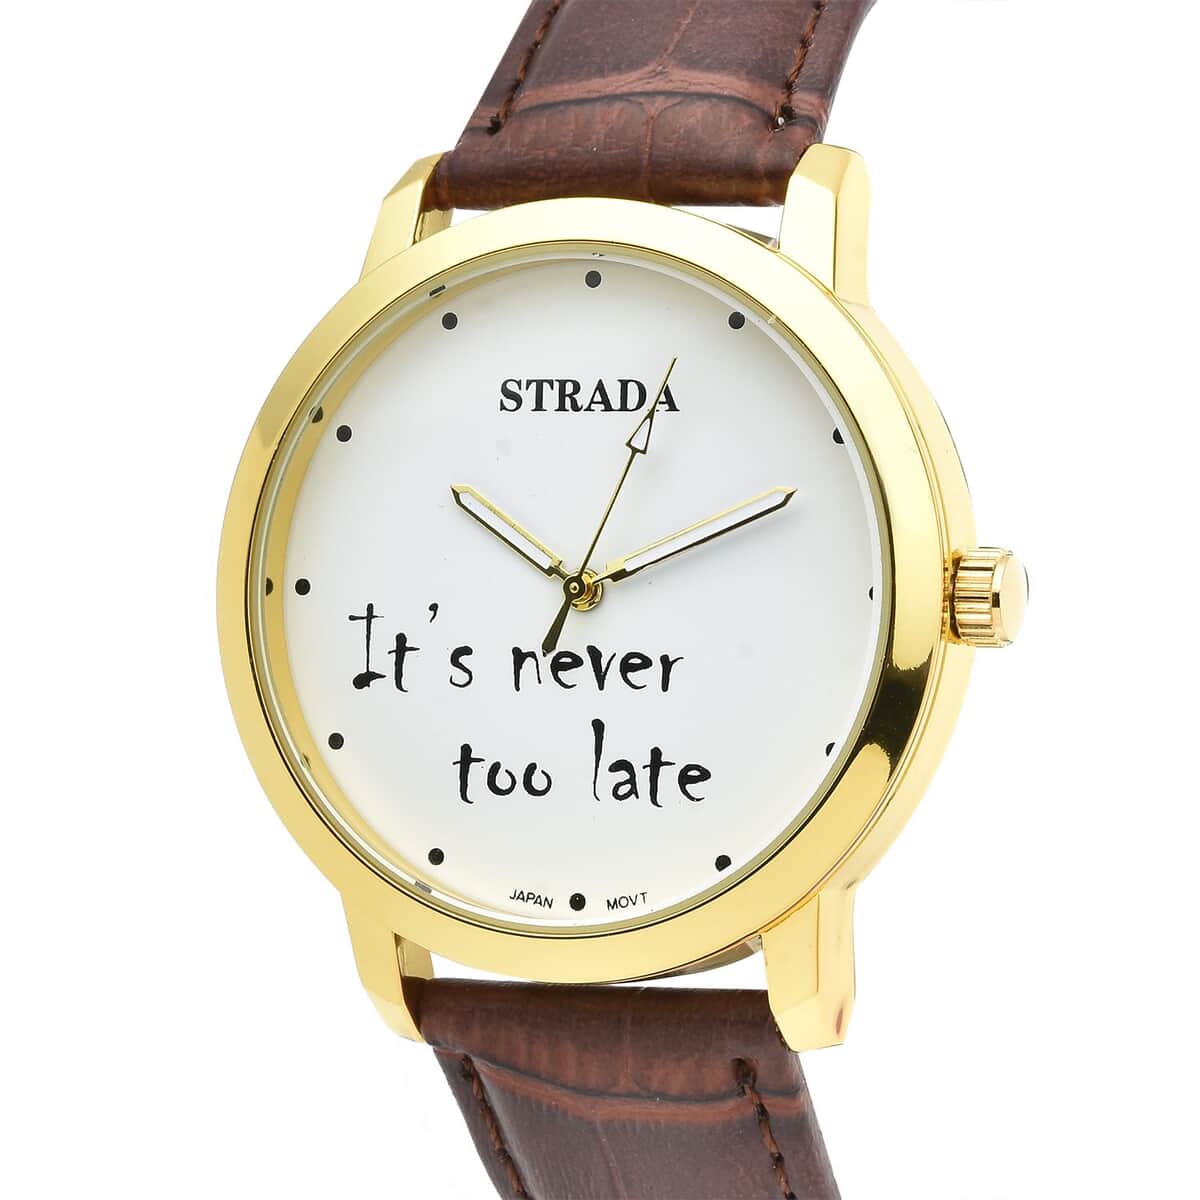 Strada Japanese Movement It's Never Too Late Dial Watch with Brown Faux Leather Strap (40.38mm) (7.5-9.0 Inch) image number 2